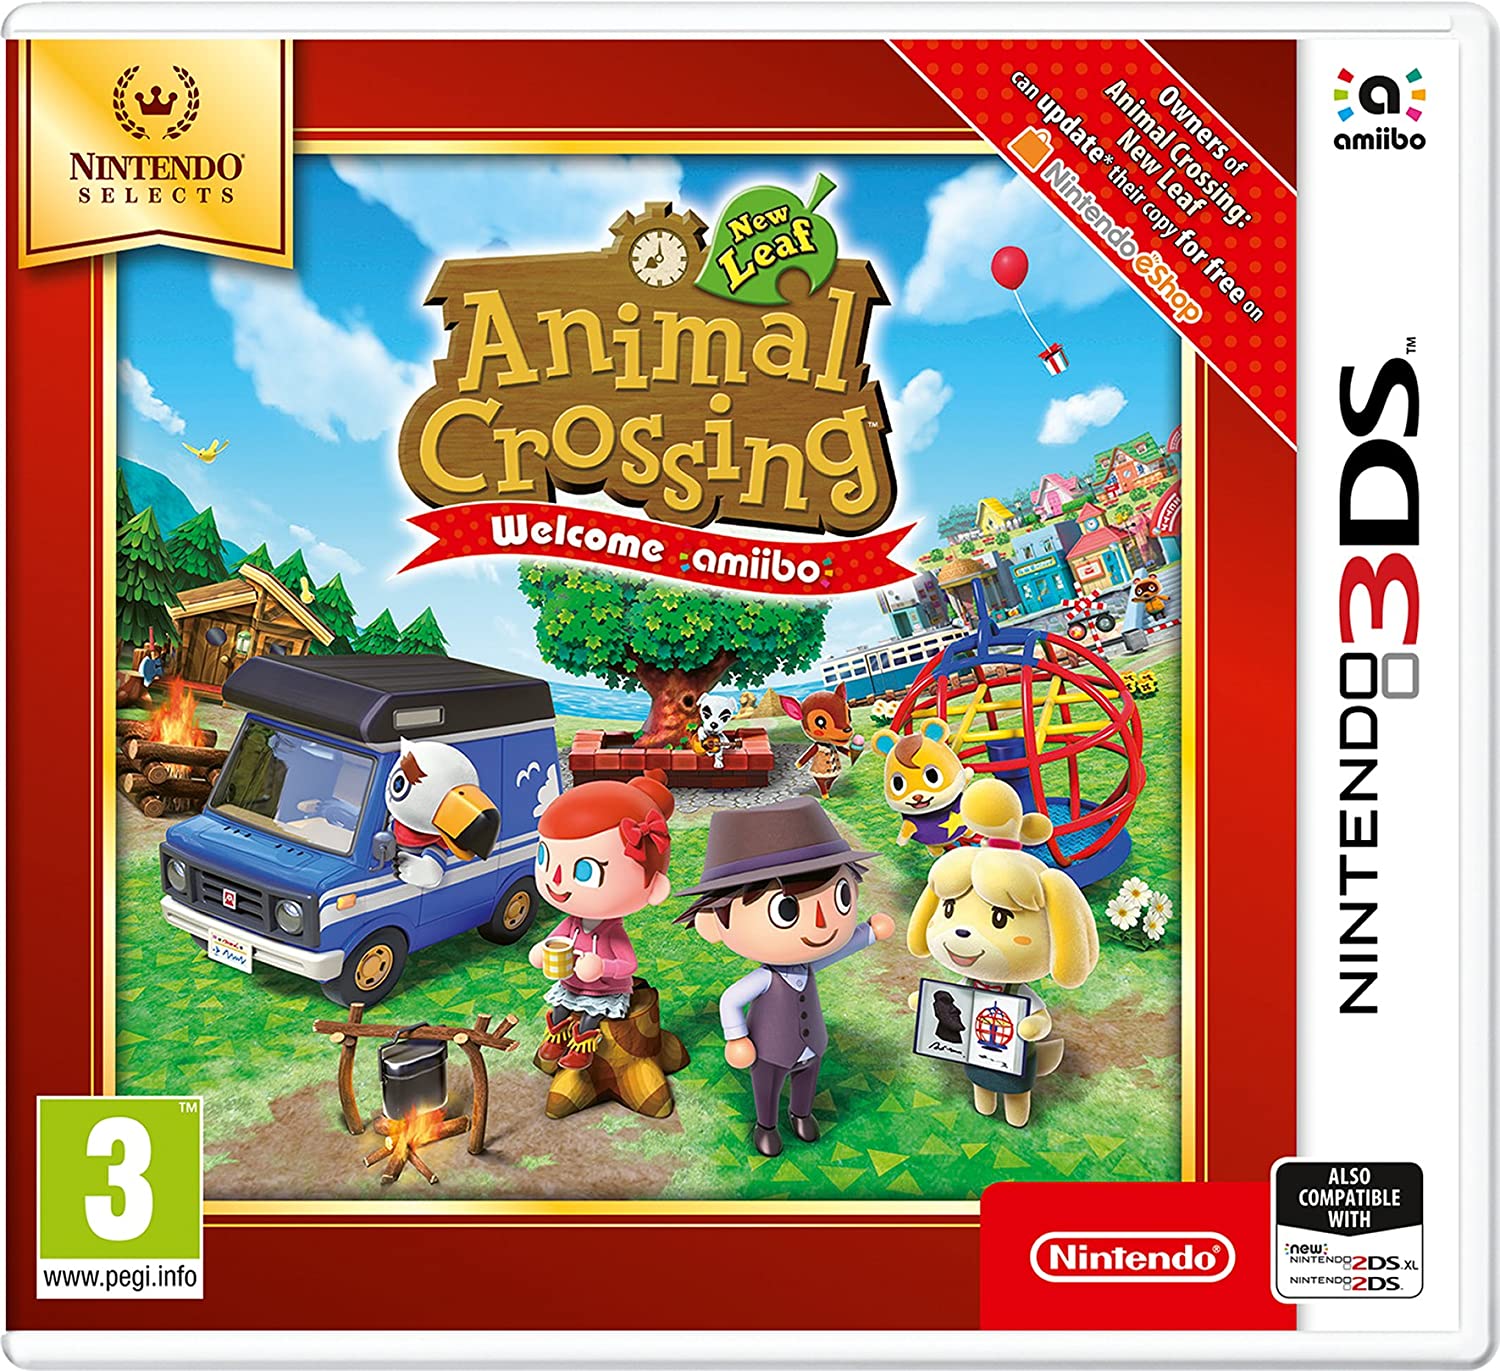 Nintendo 3DS Nintendo Selects Animal Crossing New Leaf: Welcome amiibo |  Games | Game consoles and games | Online shop 